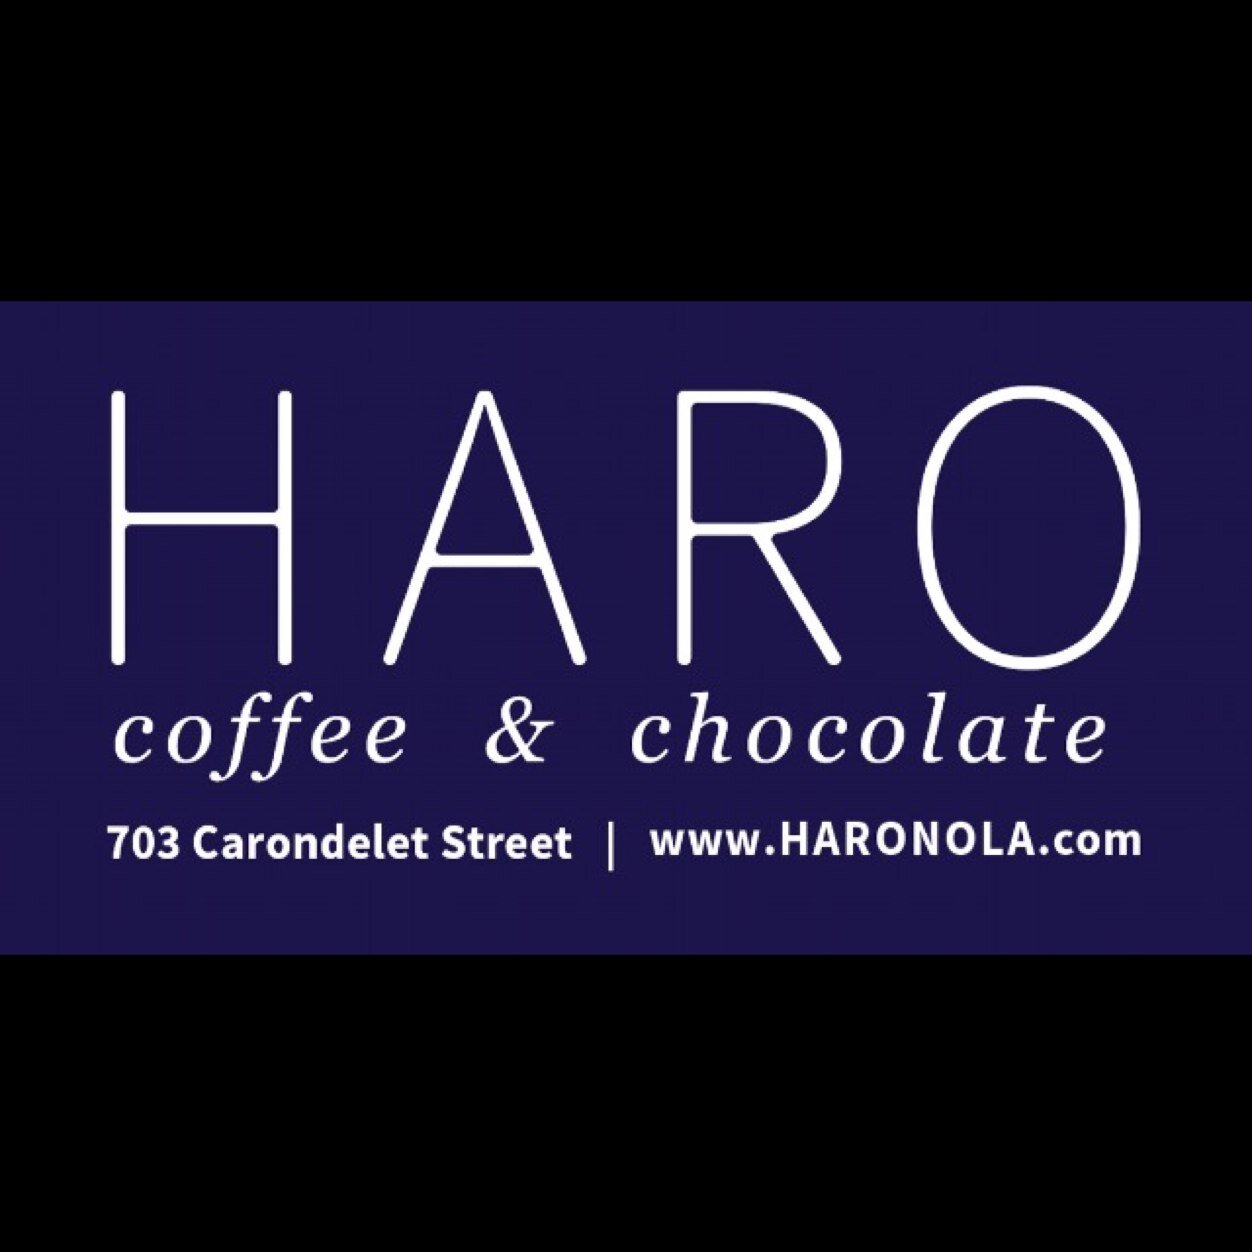 HARO coffee & chocolate is New Orleans’ premier cafe serving locally roasted, fair trade, organic coffee and Grand Cru specialty chocolates.